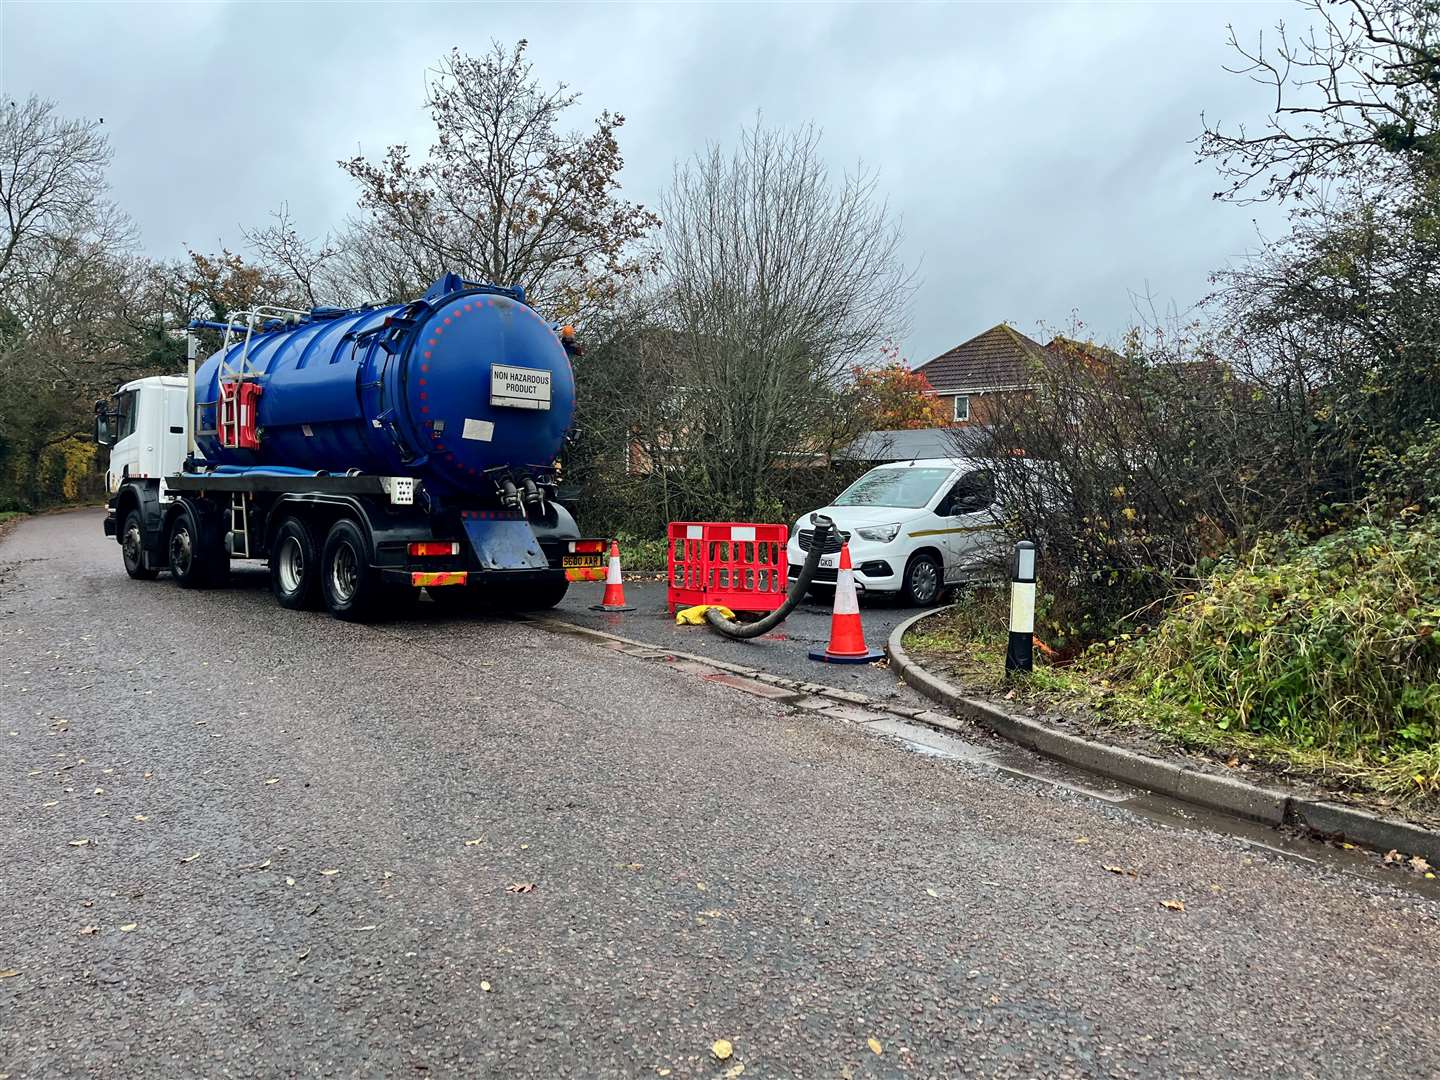 Pound Lane residents have shared their concerns over wastewater damaging the road